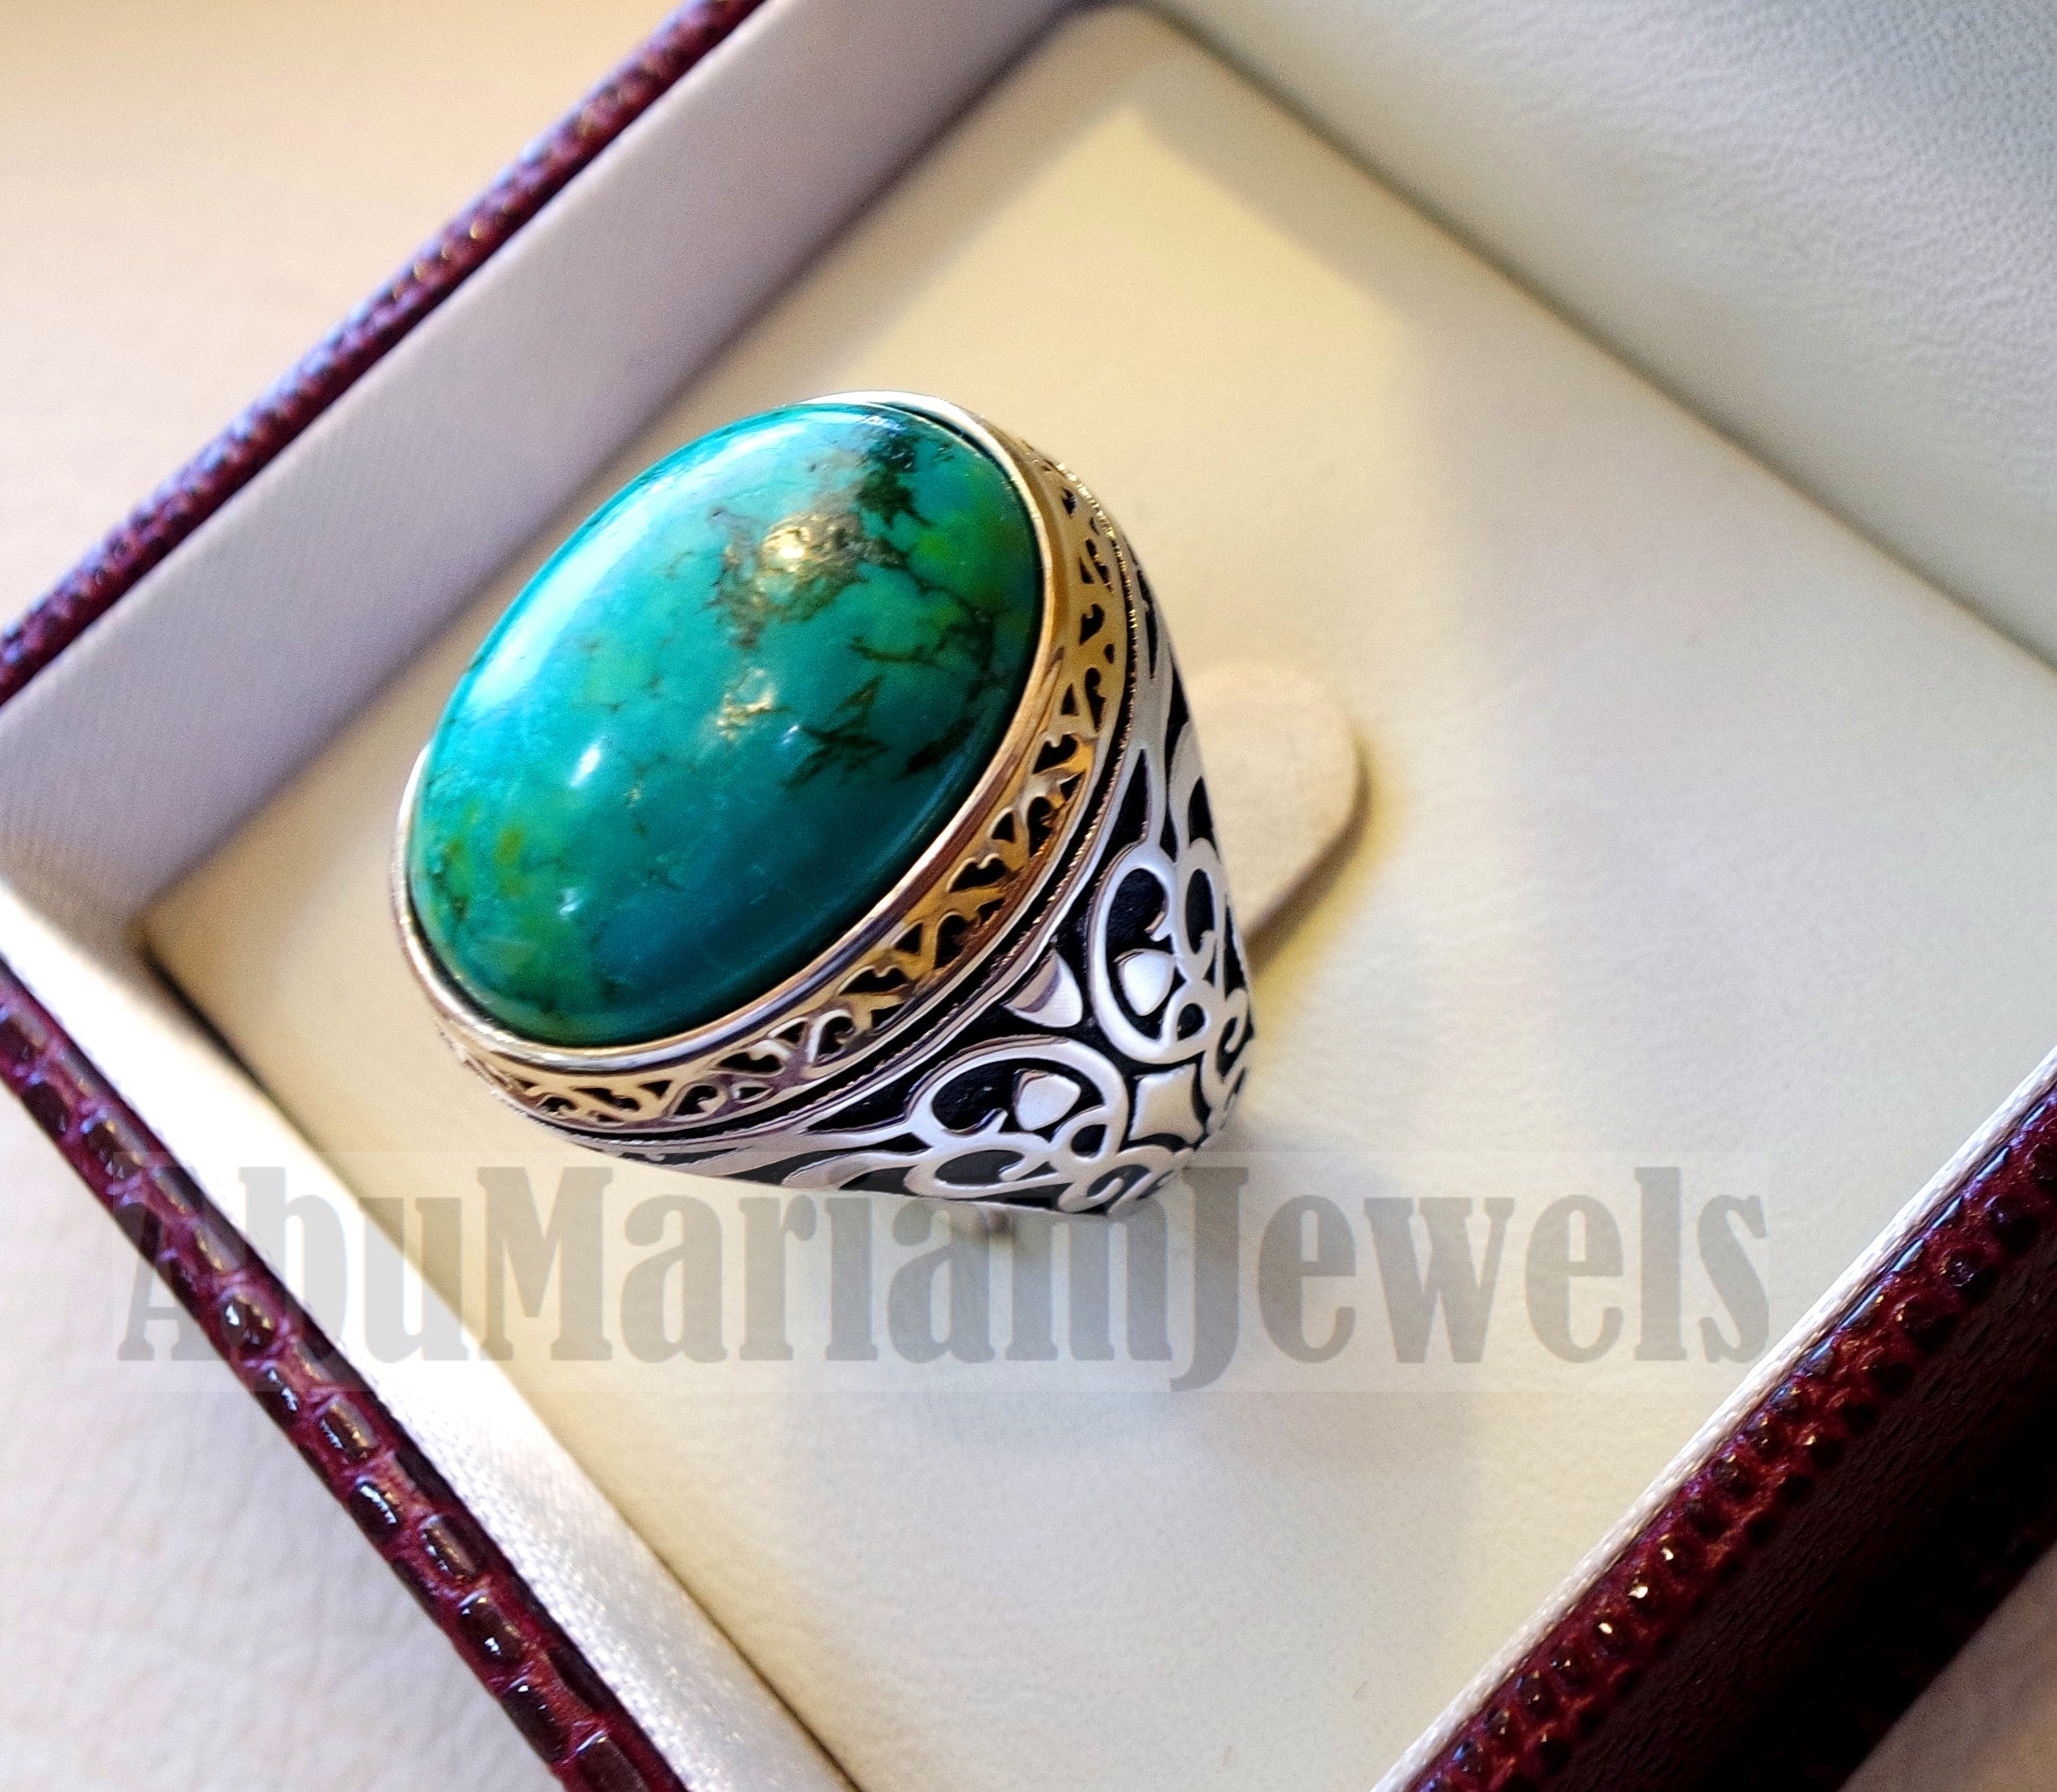 man ring nishapur tibet turquoise blue natural high quality stone sterling silver 925 and gold plated frame gem middle eastern style